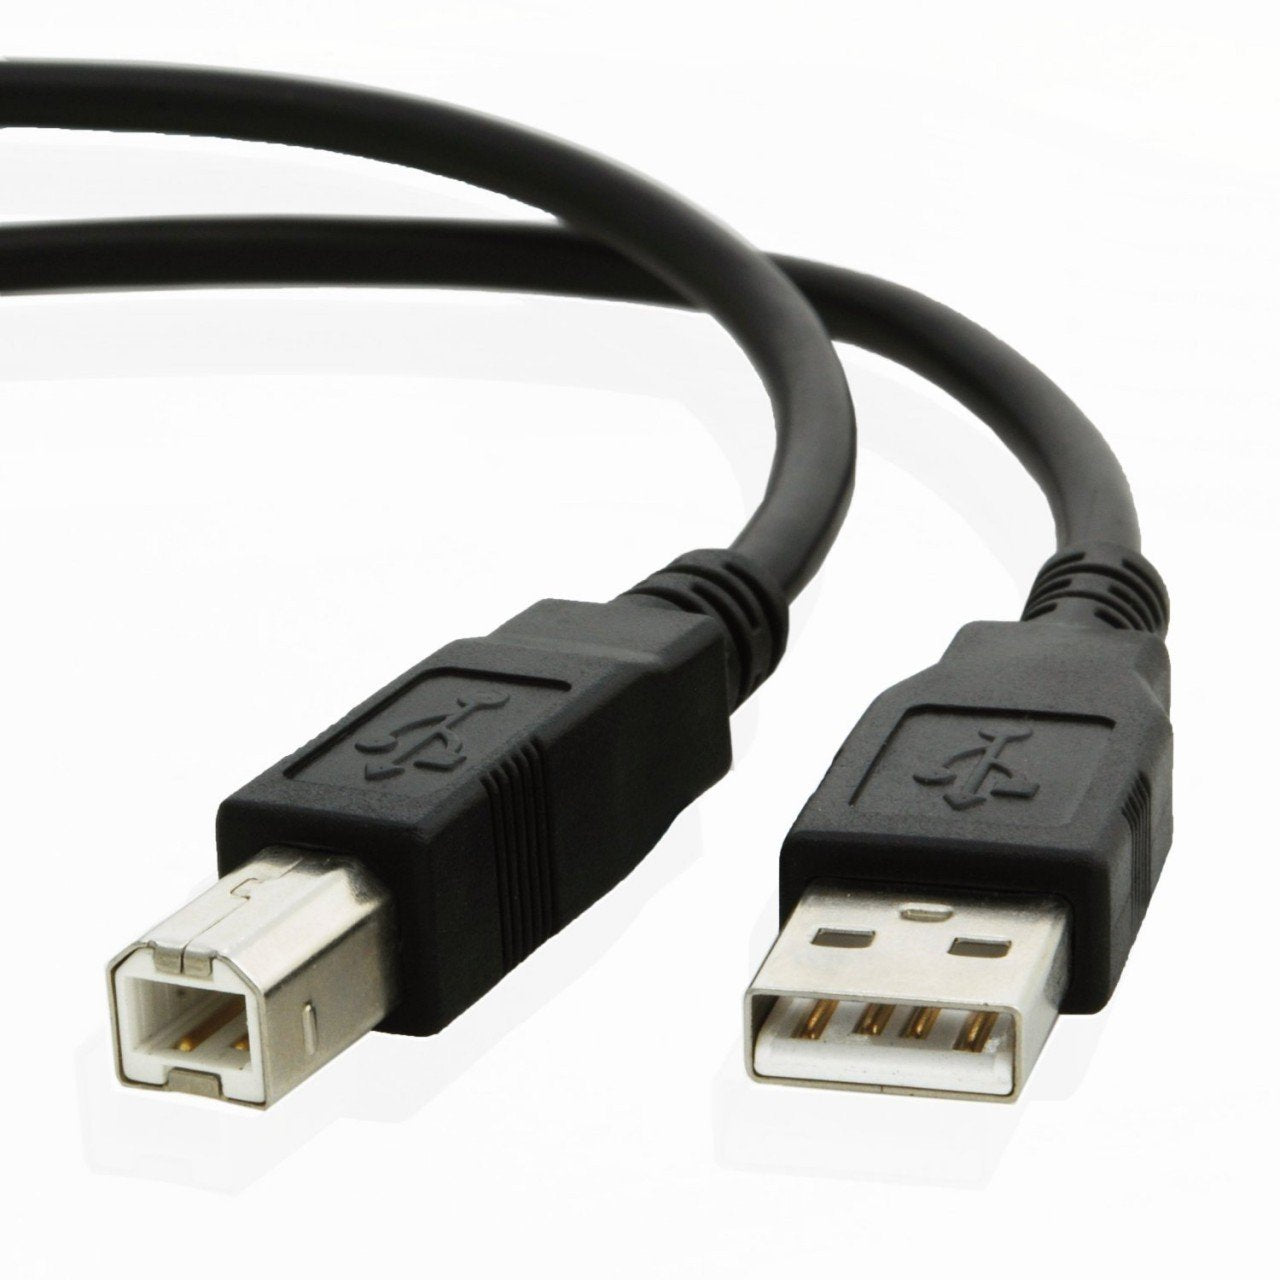 USB cable for Epson EXPRESSION ET-2650